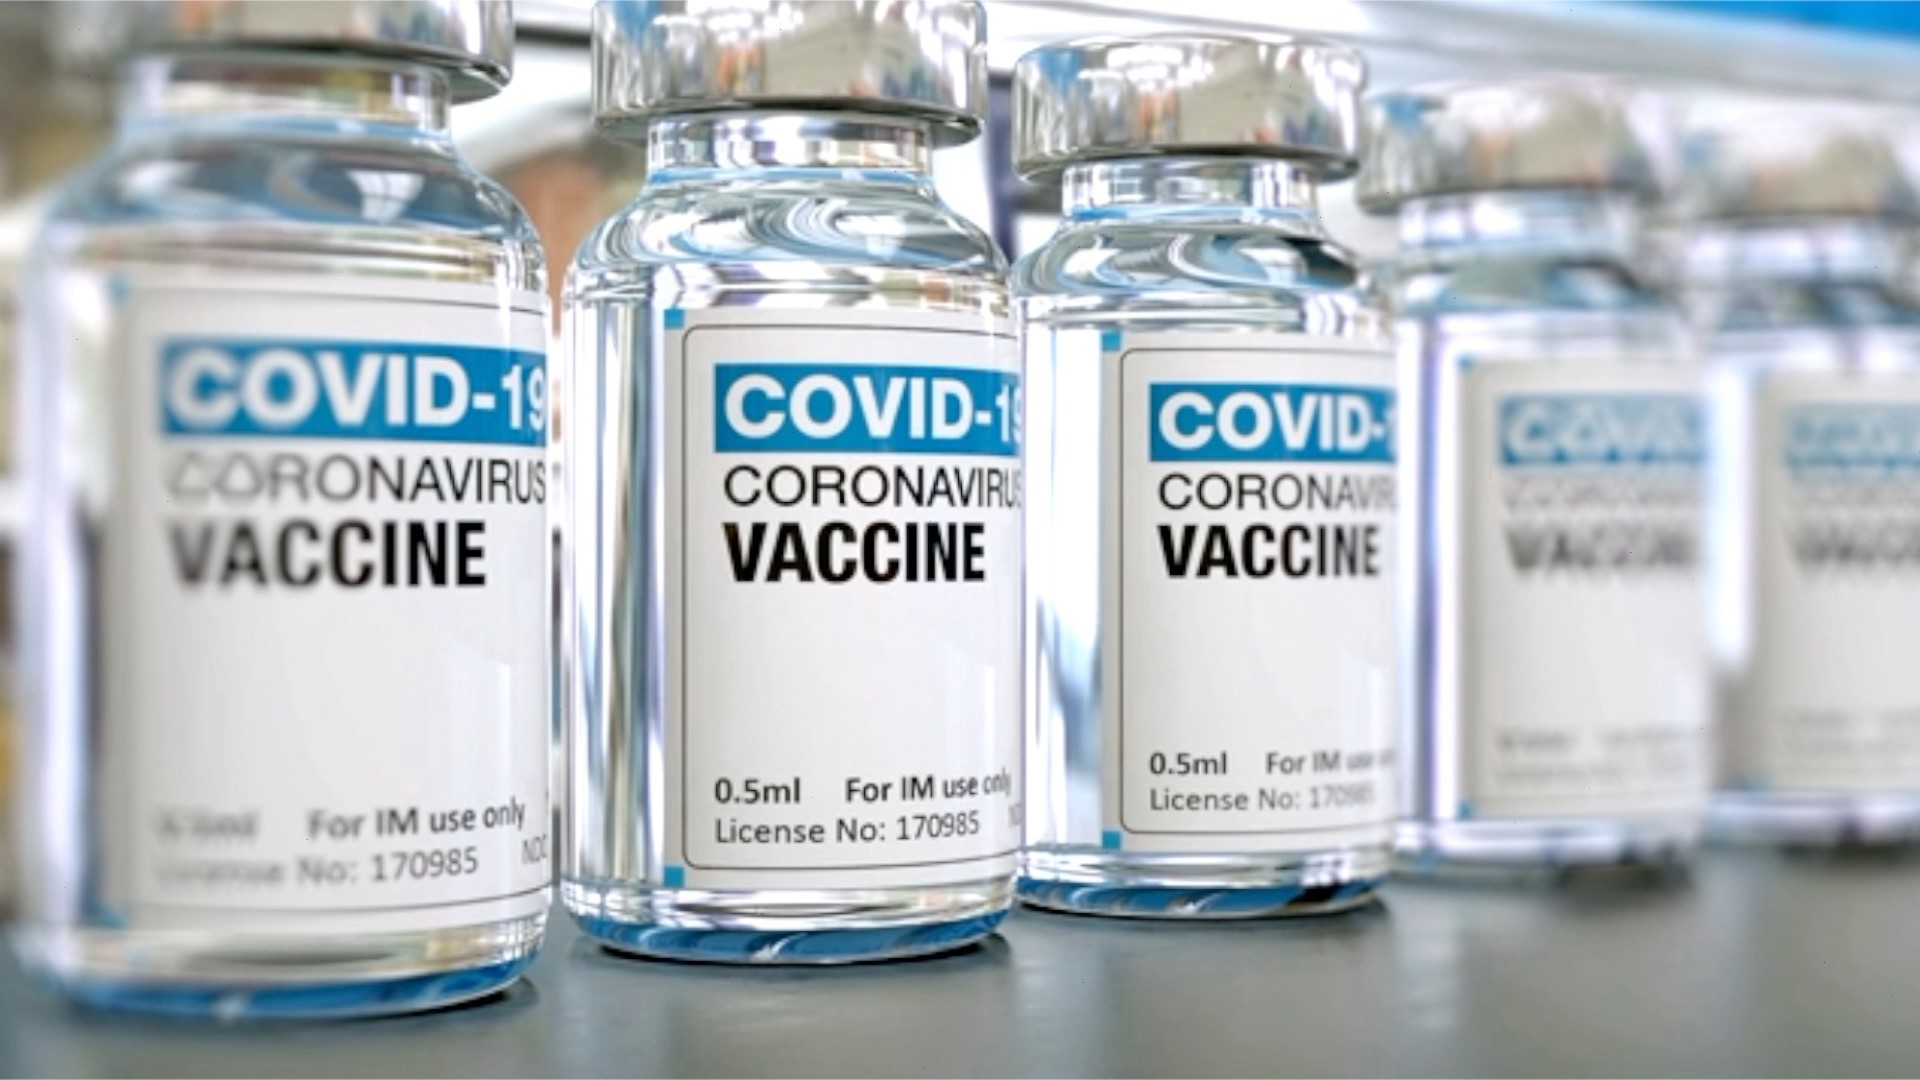 Companies and local governments are taking Covid-19 vaccine incentives to the next level. These incentives, no matter how attractive, may not help those who lack trust in the vaccine or those who have accessibility issues. Veuer's Johana Restrepo has more.